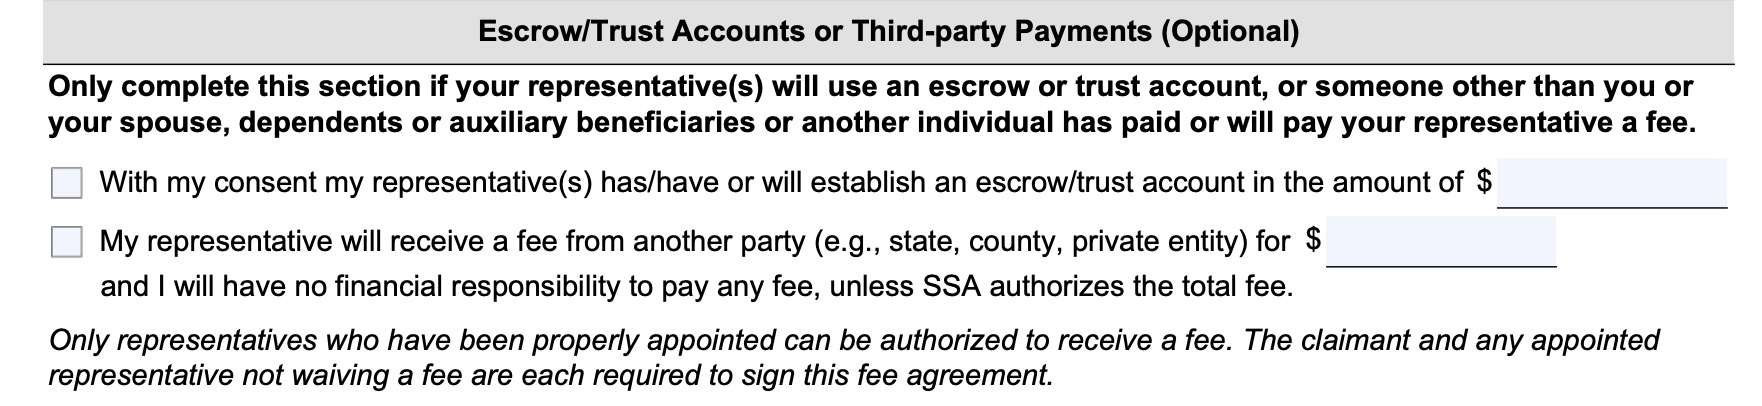 escrow/trust accounts or third party payments